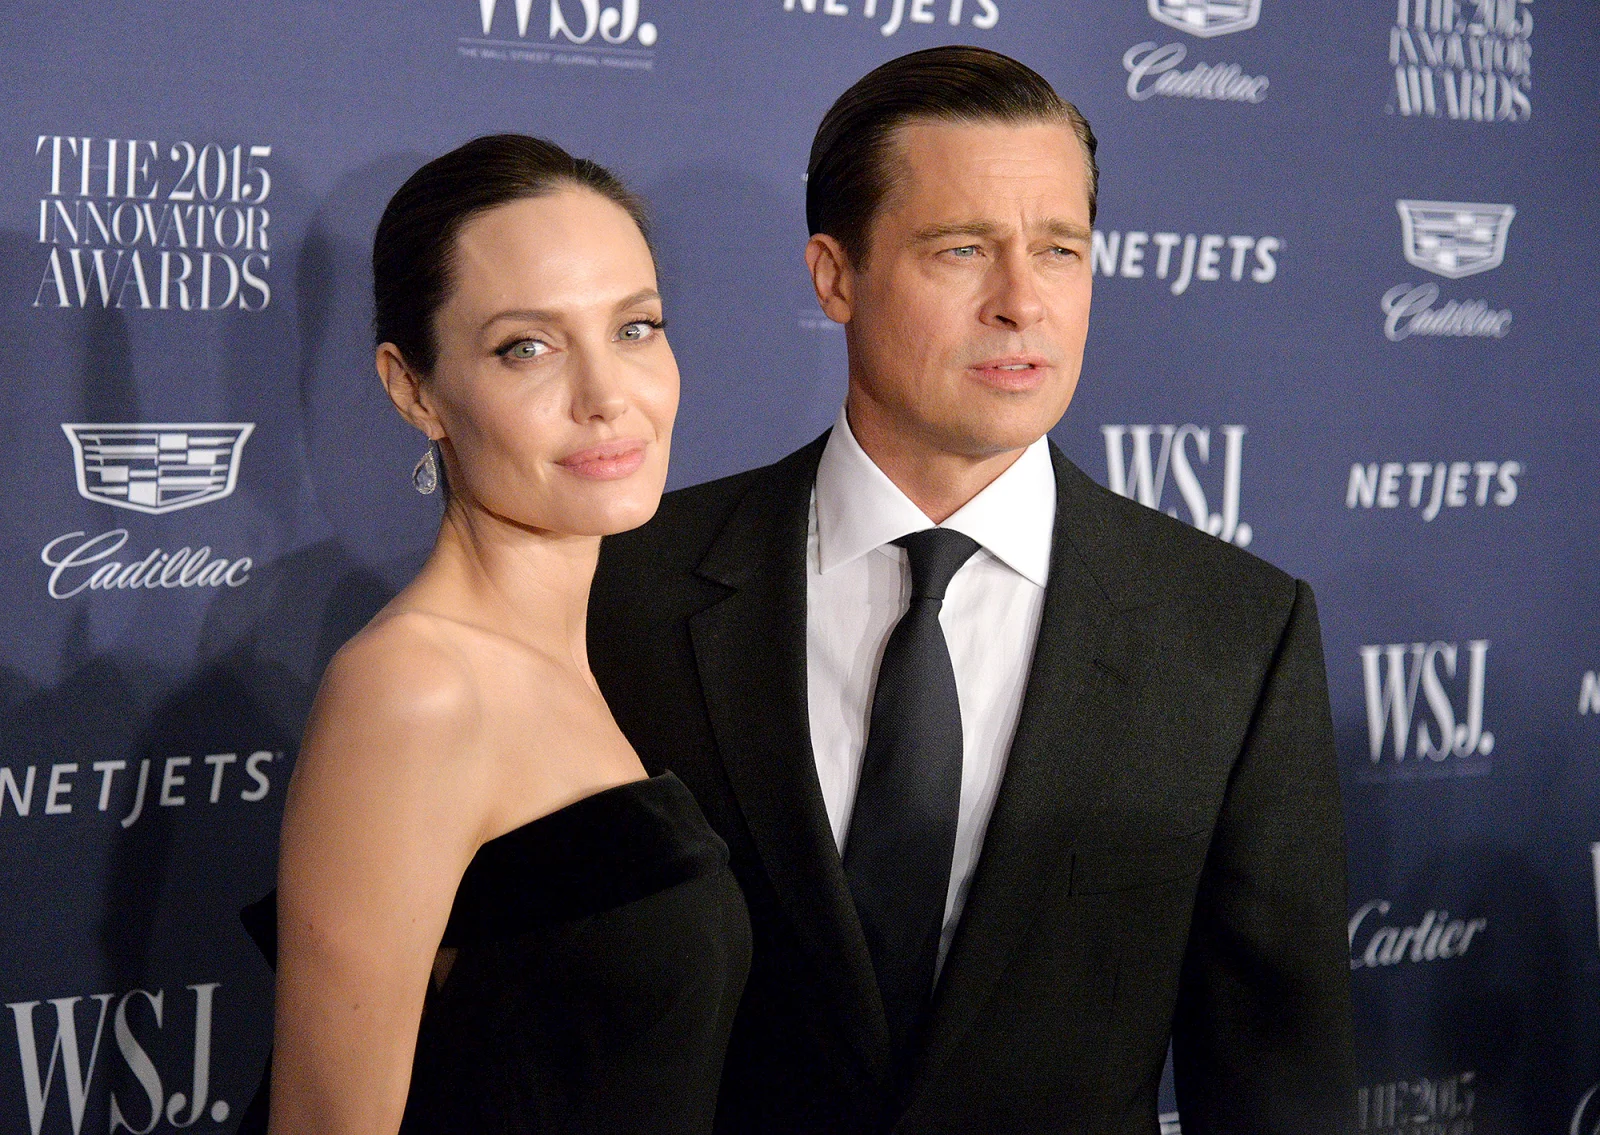 Brad Pitt confesses that his art stems out from the guilt of past relationships